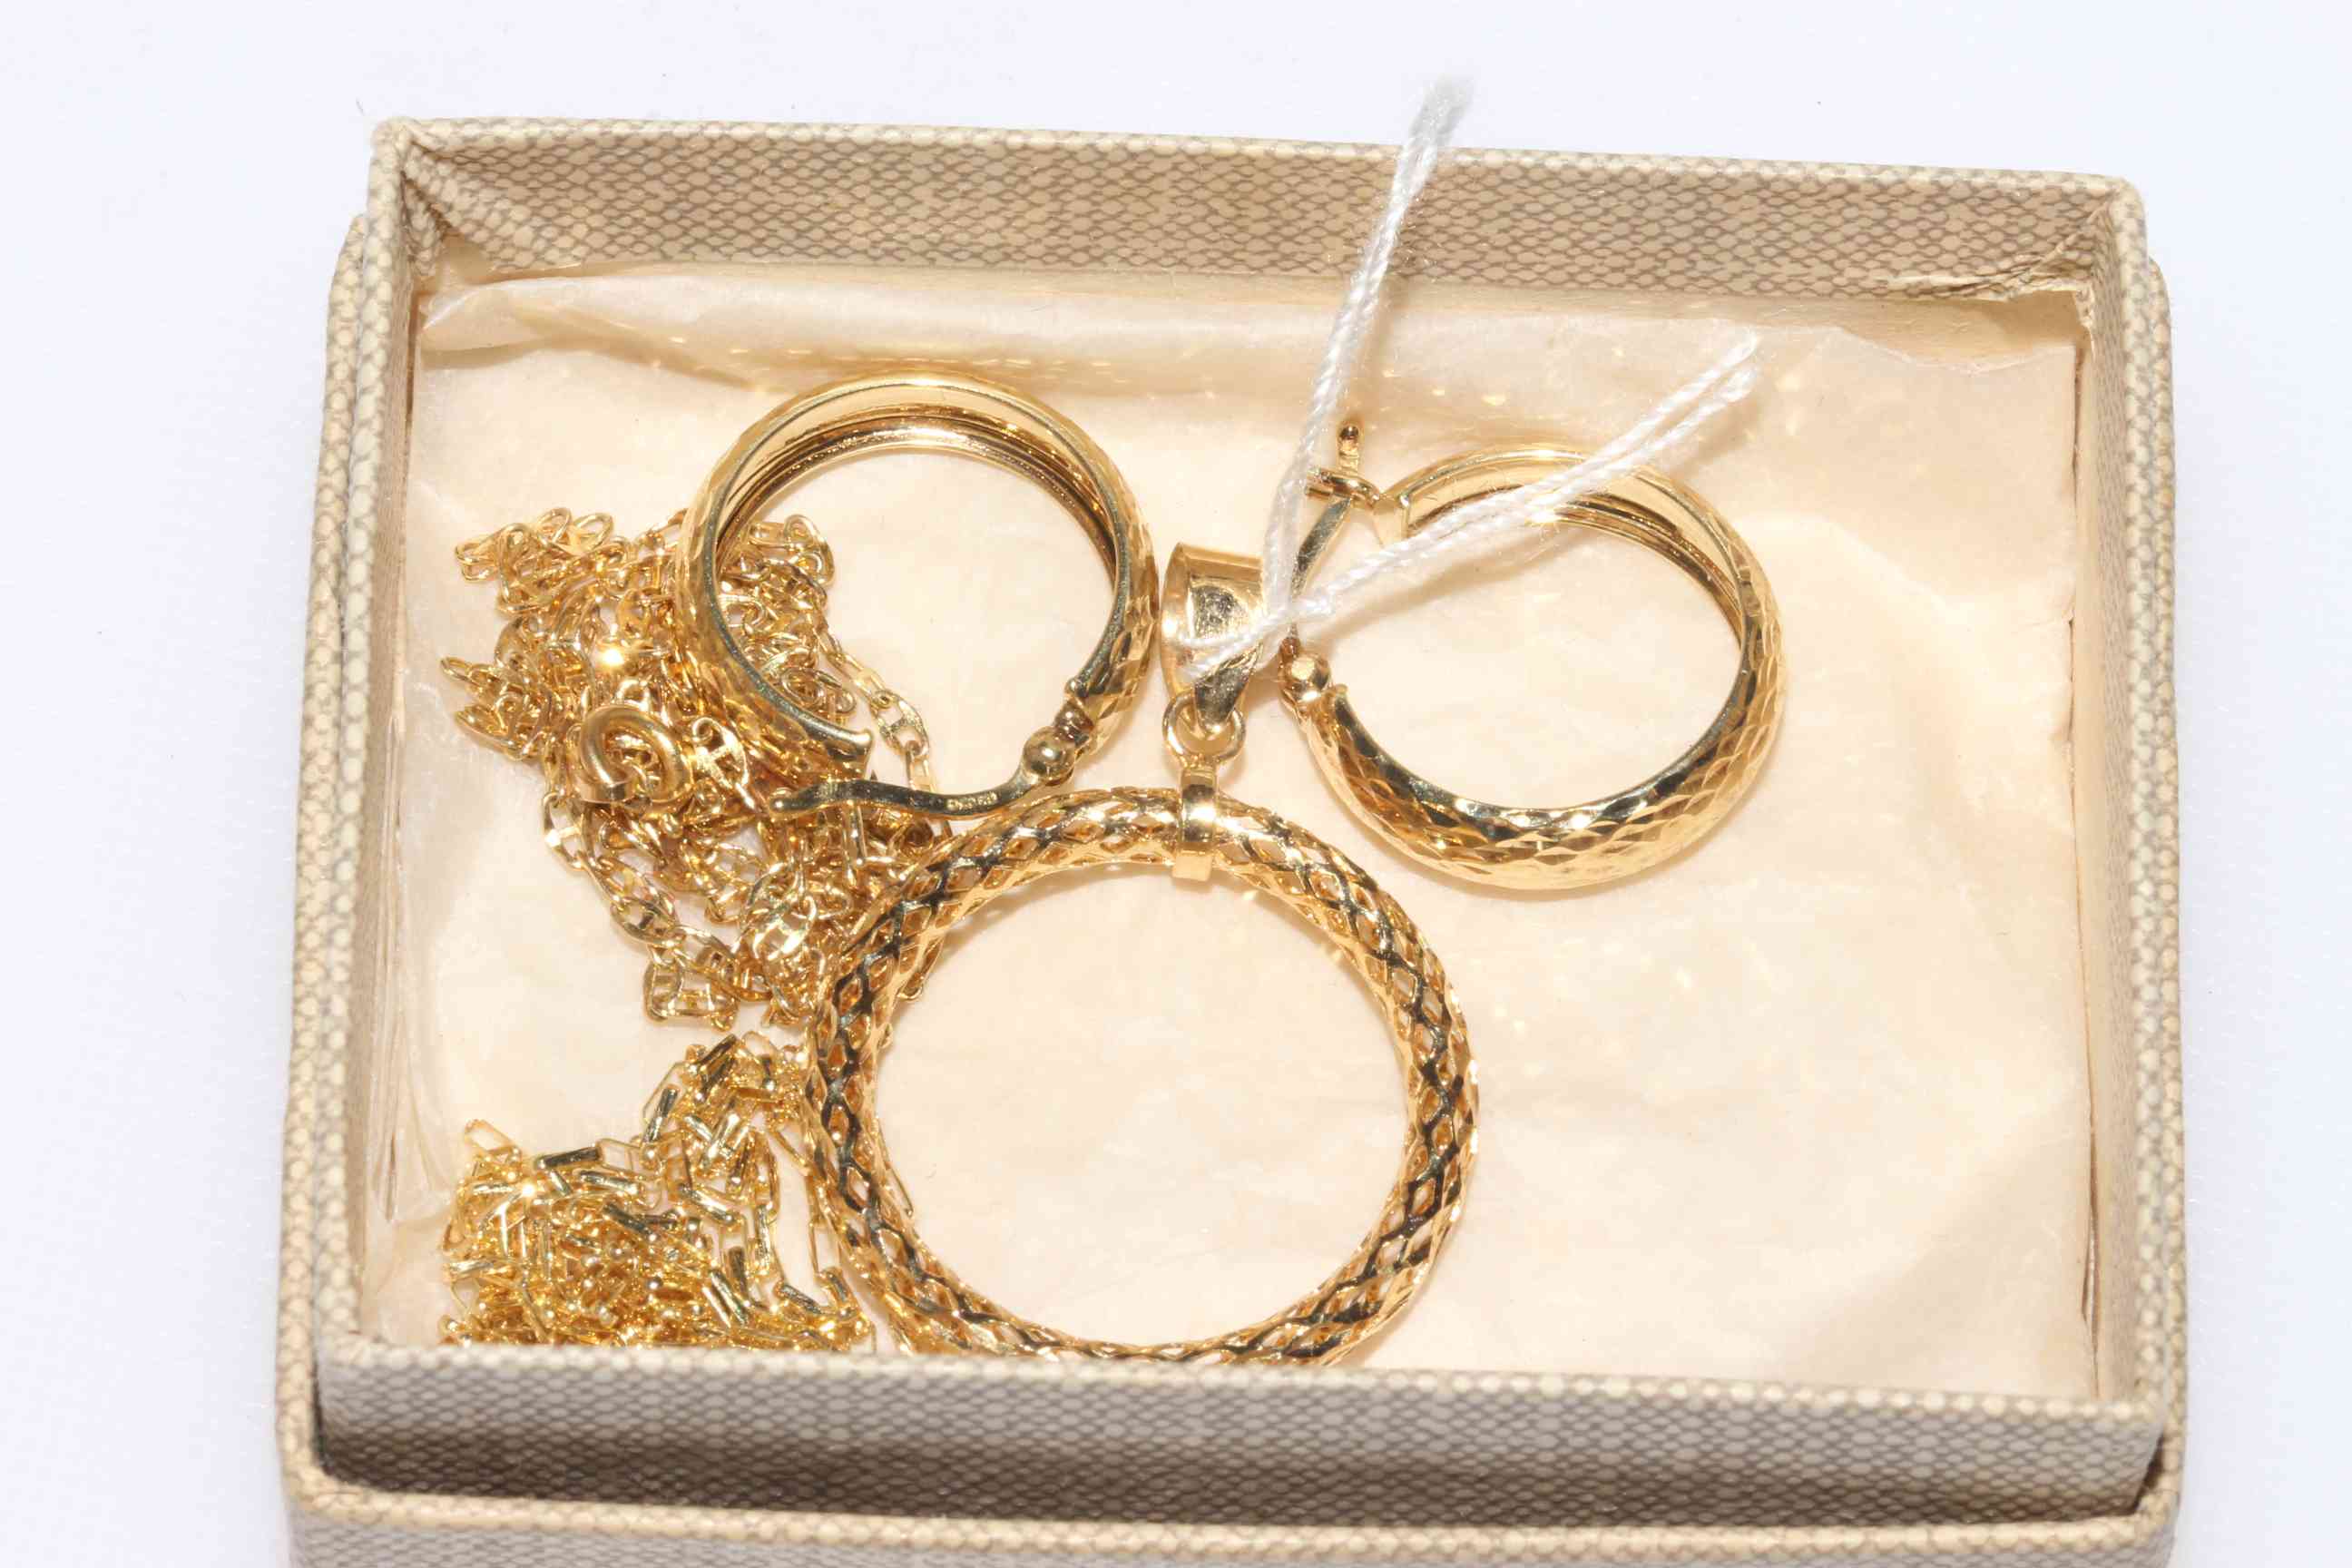 9 carat gold ring pendant, pair earrings and two fine chain necklaces.